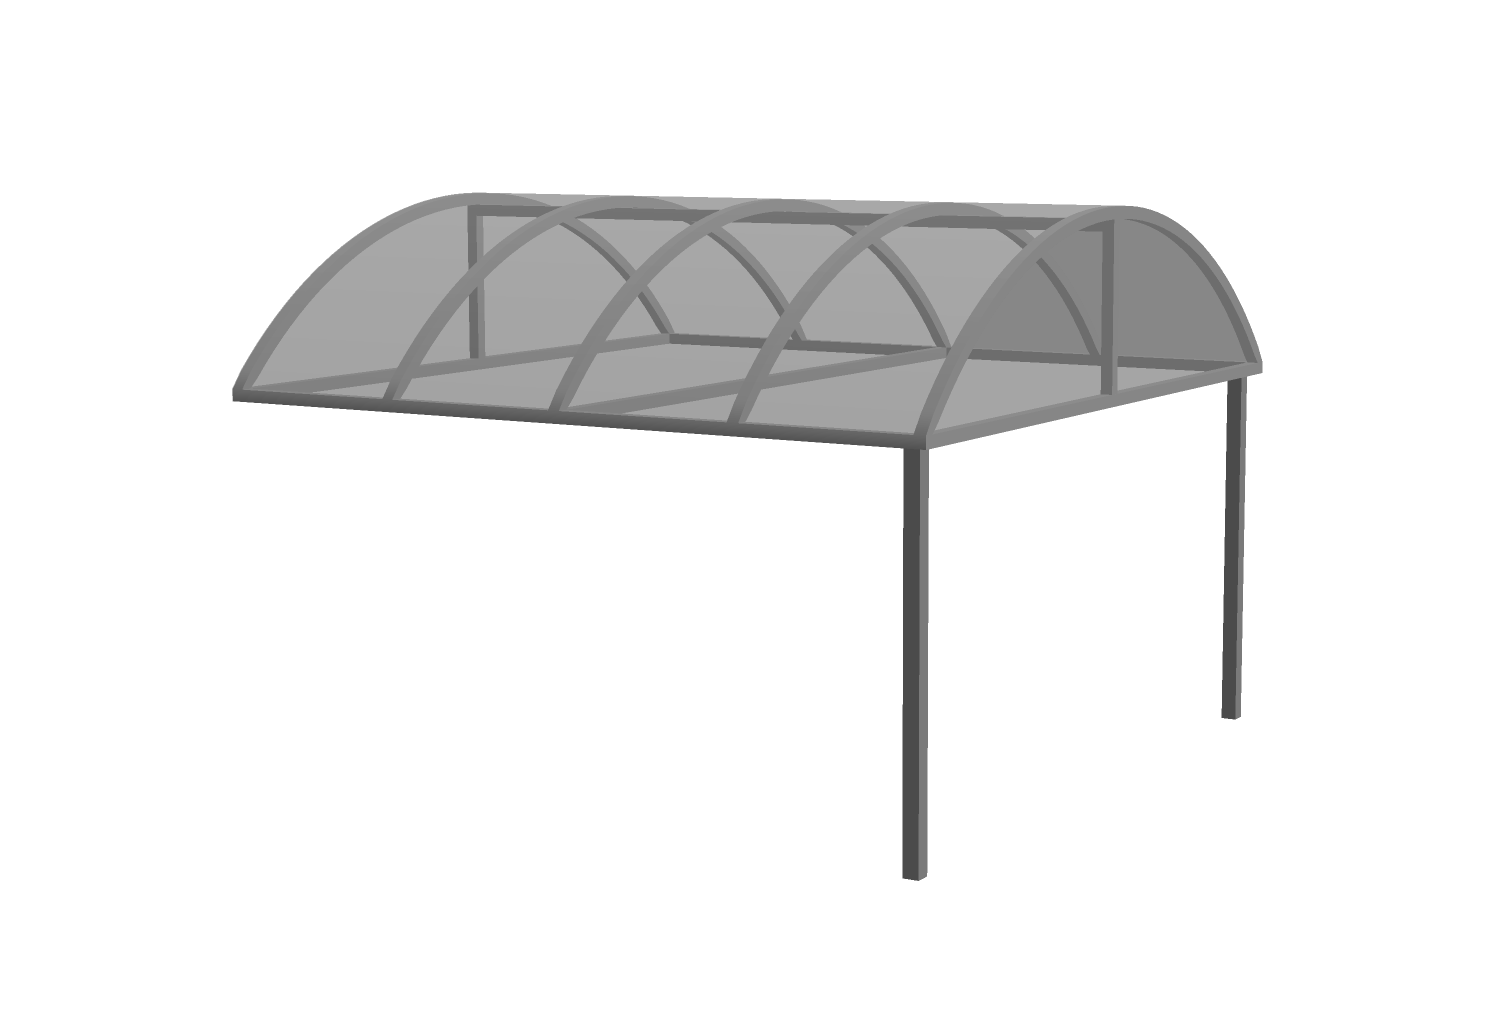 3D model of a round marquee awning